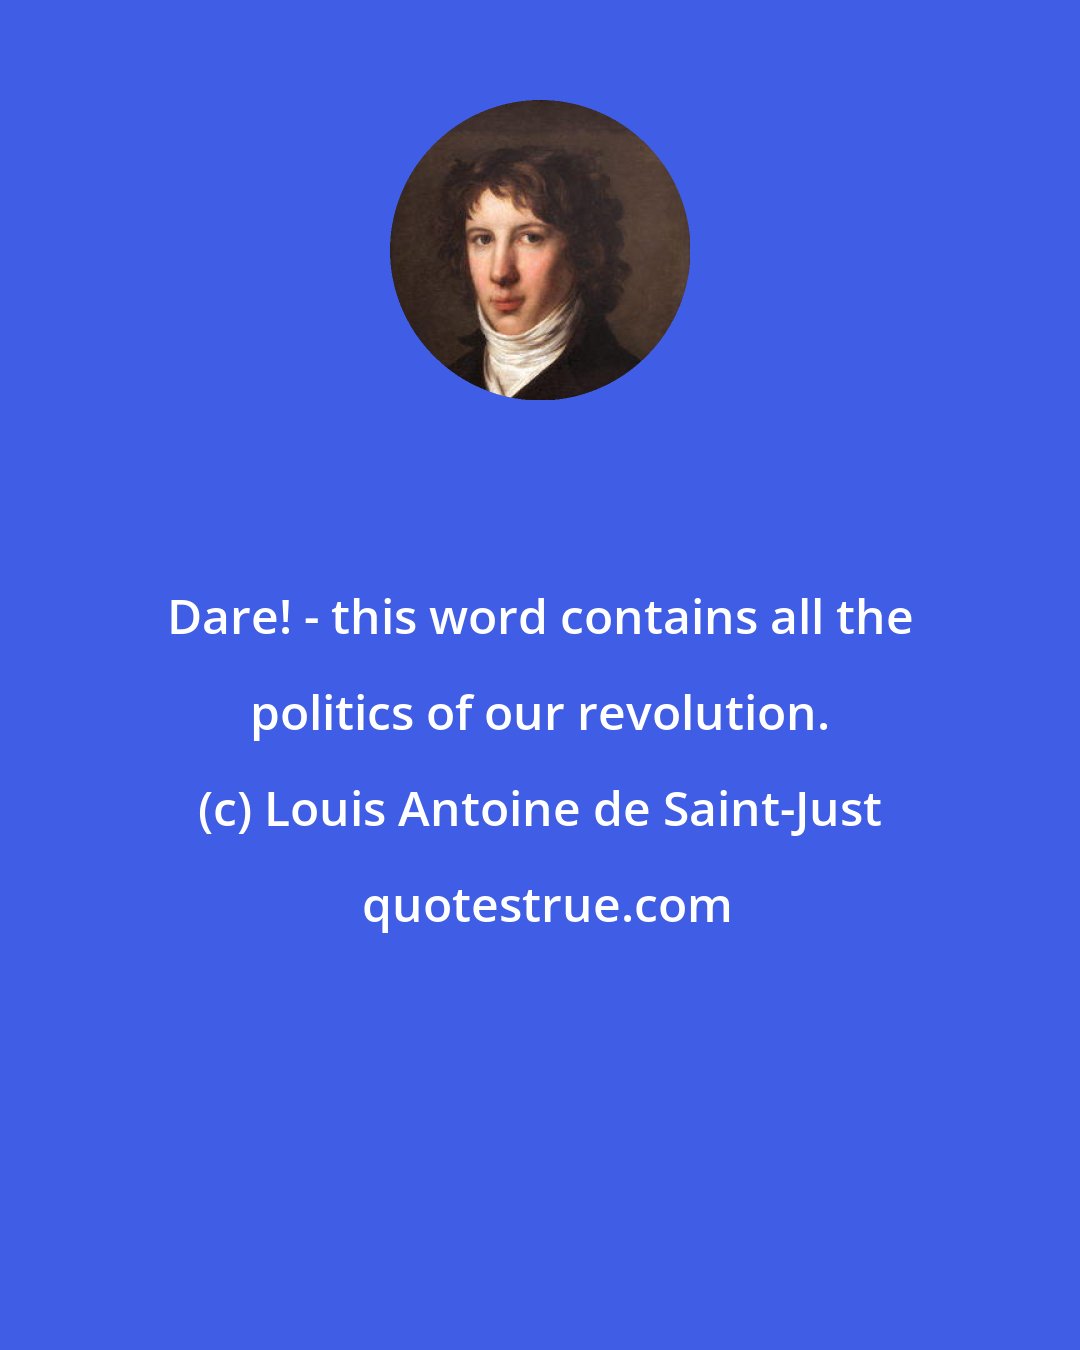 Louis Antoine de Saint-Just: Dare! - this word contains all the politics of our revolution.